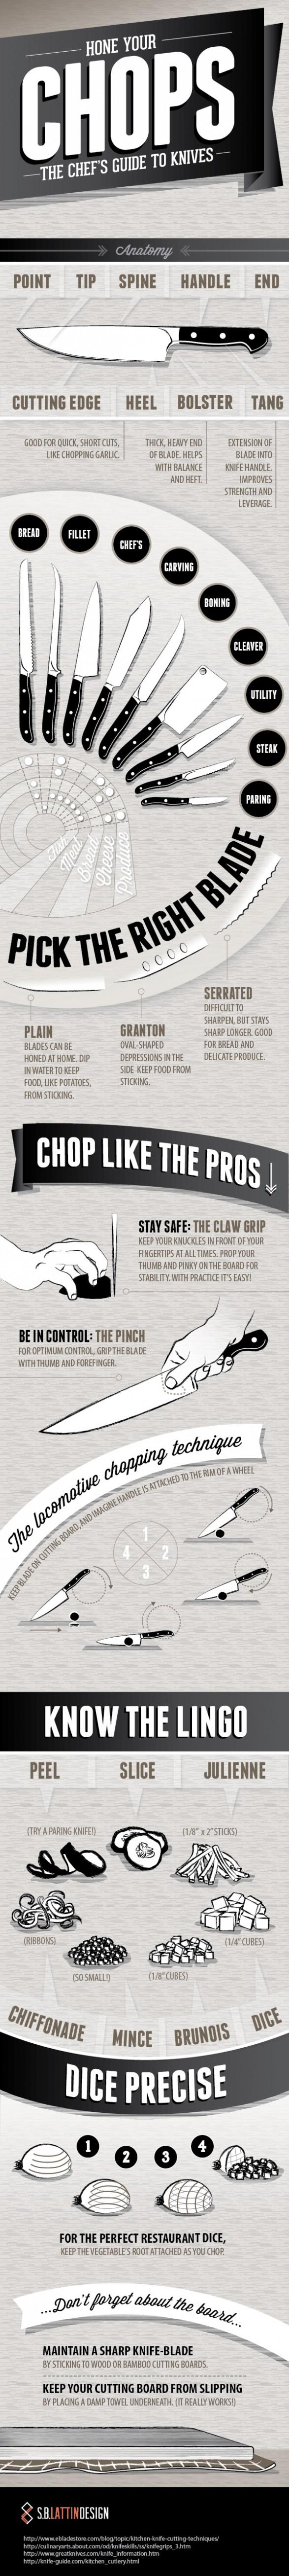 Hone Your Chops: The Chef